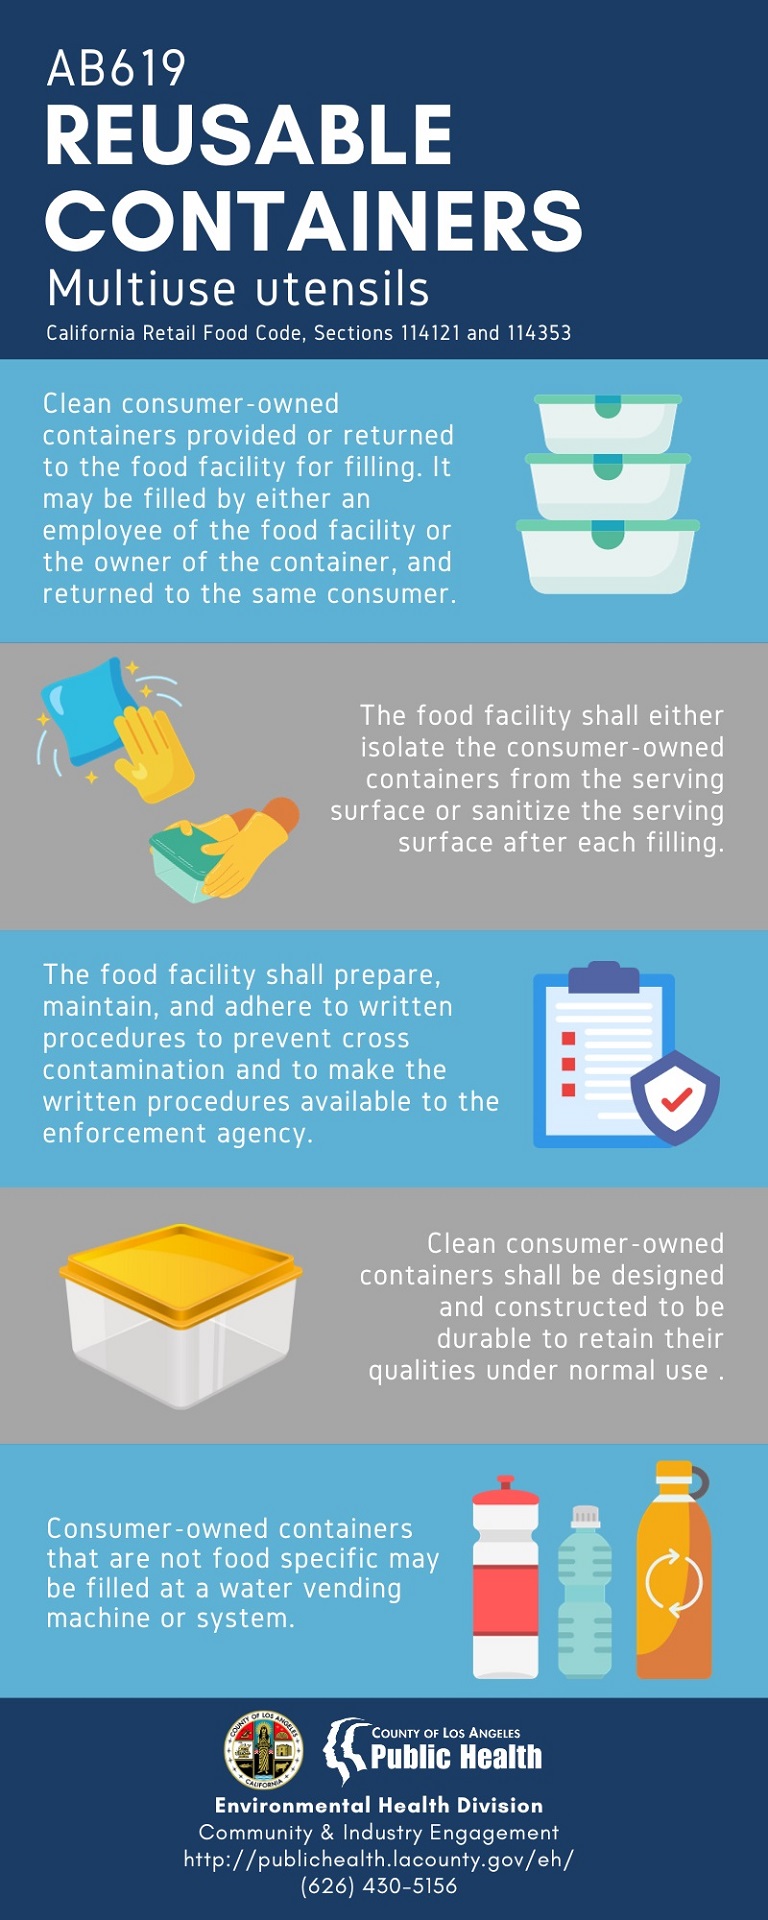 AB619 Reusable Containers Summary